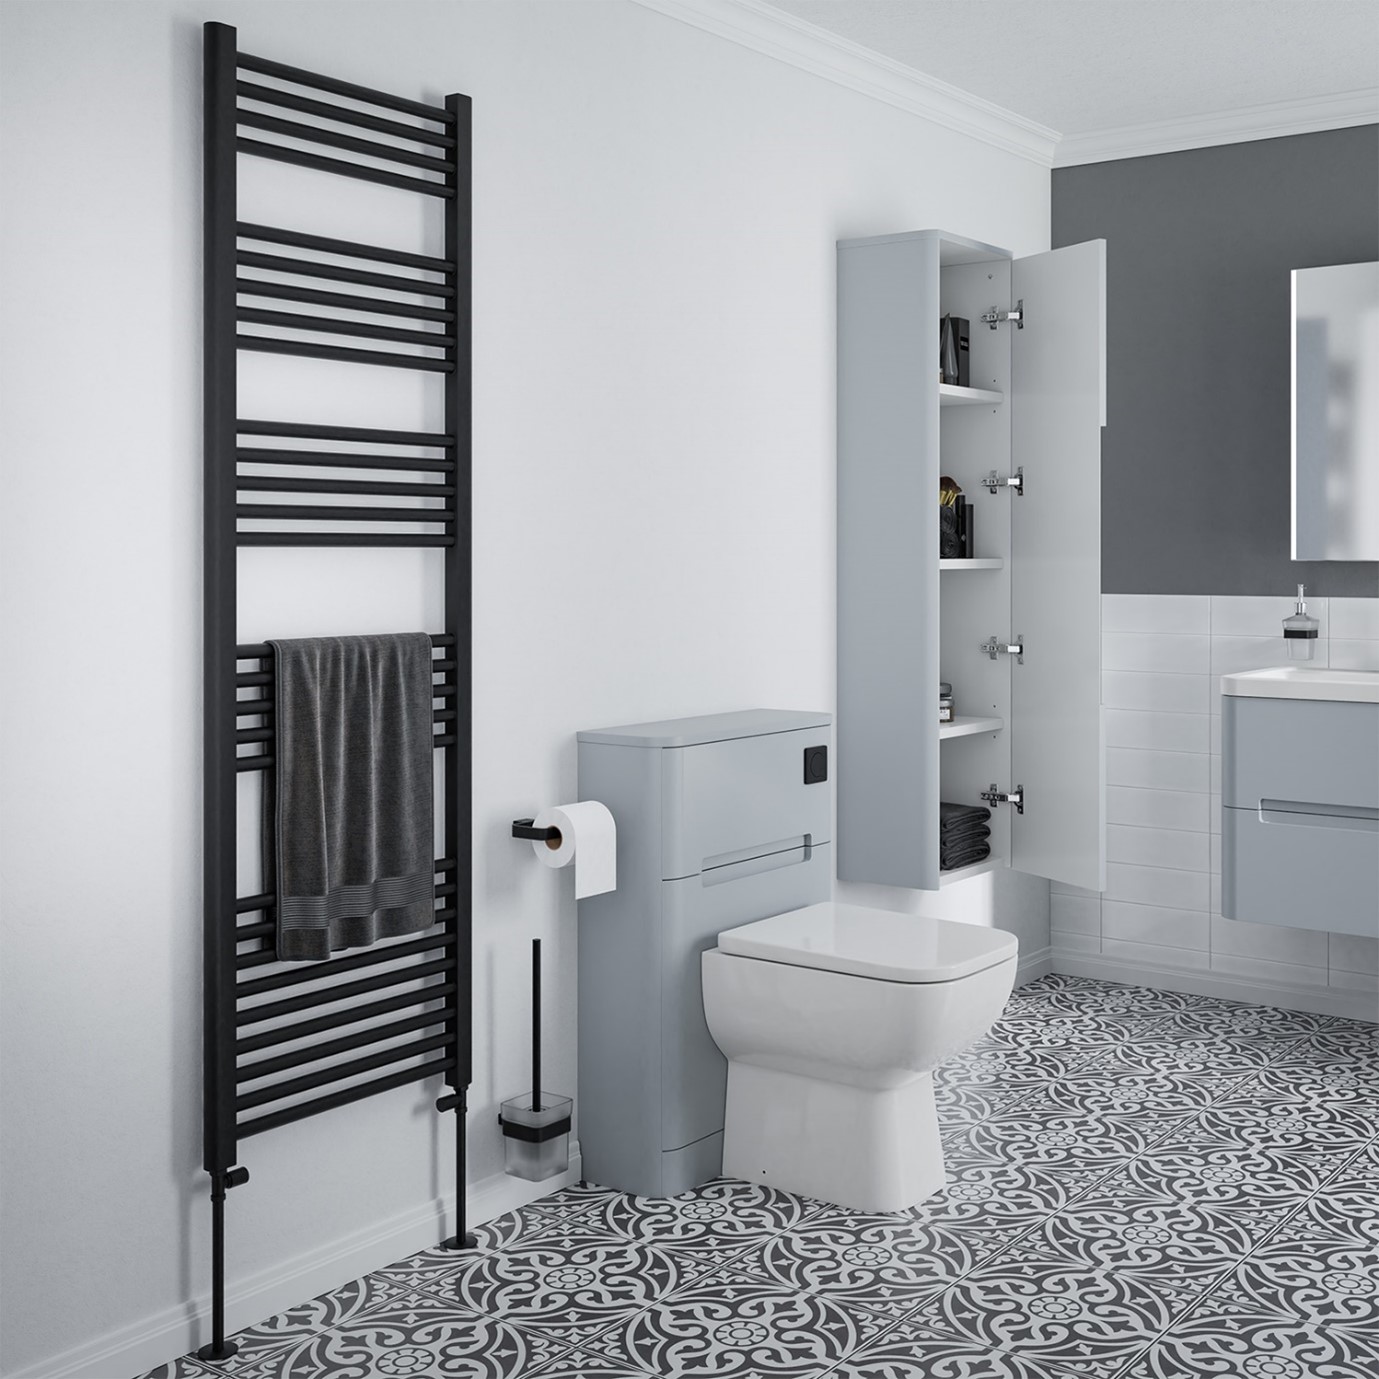 A Small Modern Grey Bathroom with Pattered Ceramic Tiles, Matt Black Heated Towel Rail, and a Stylish Toilet Unit